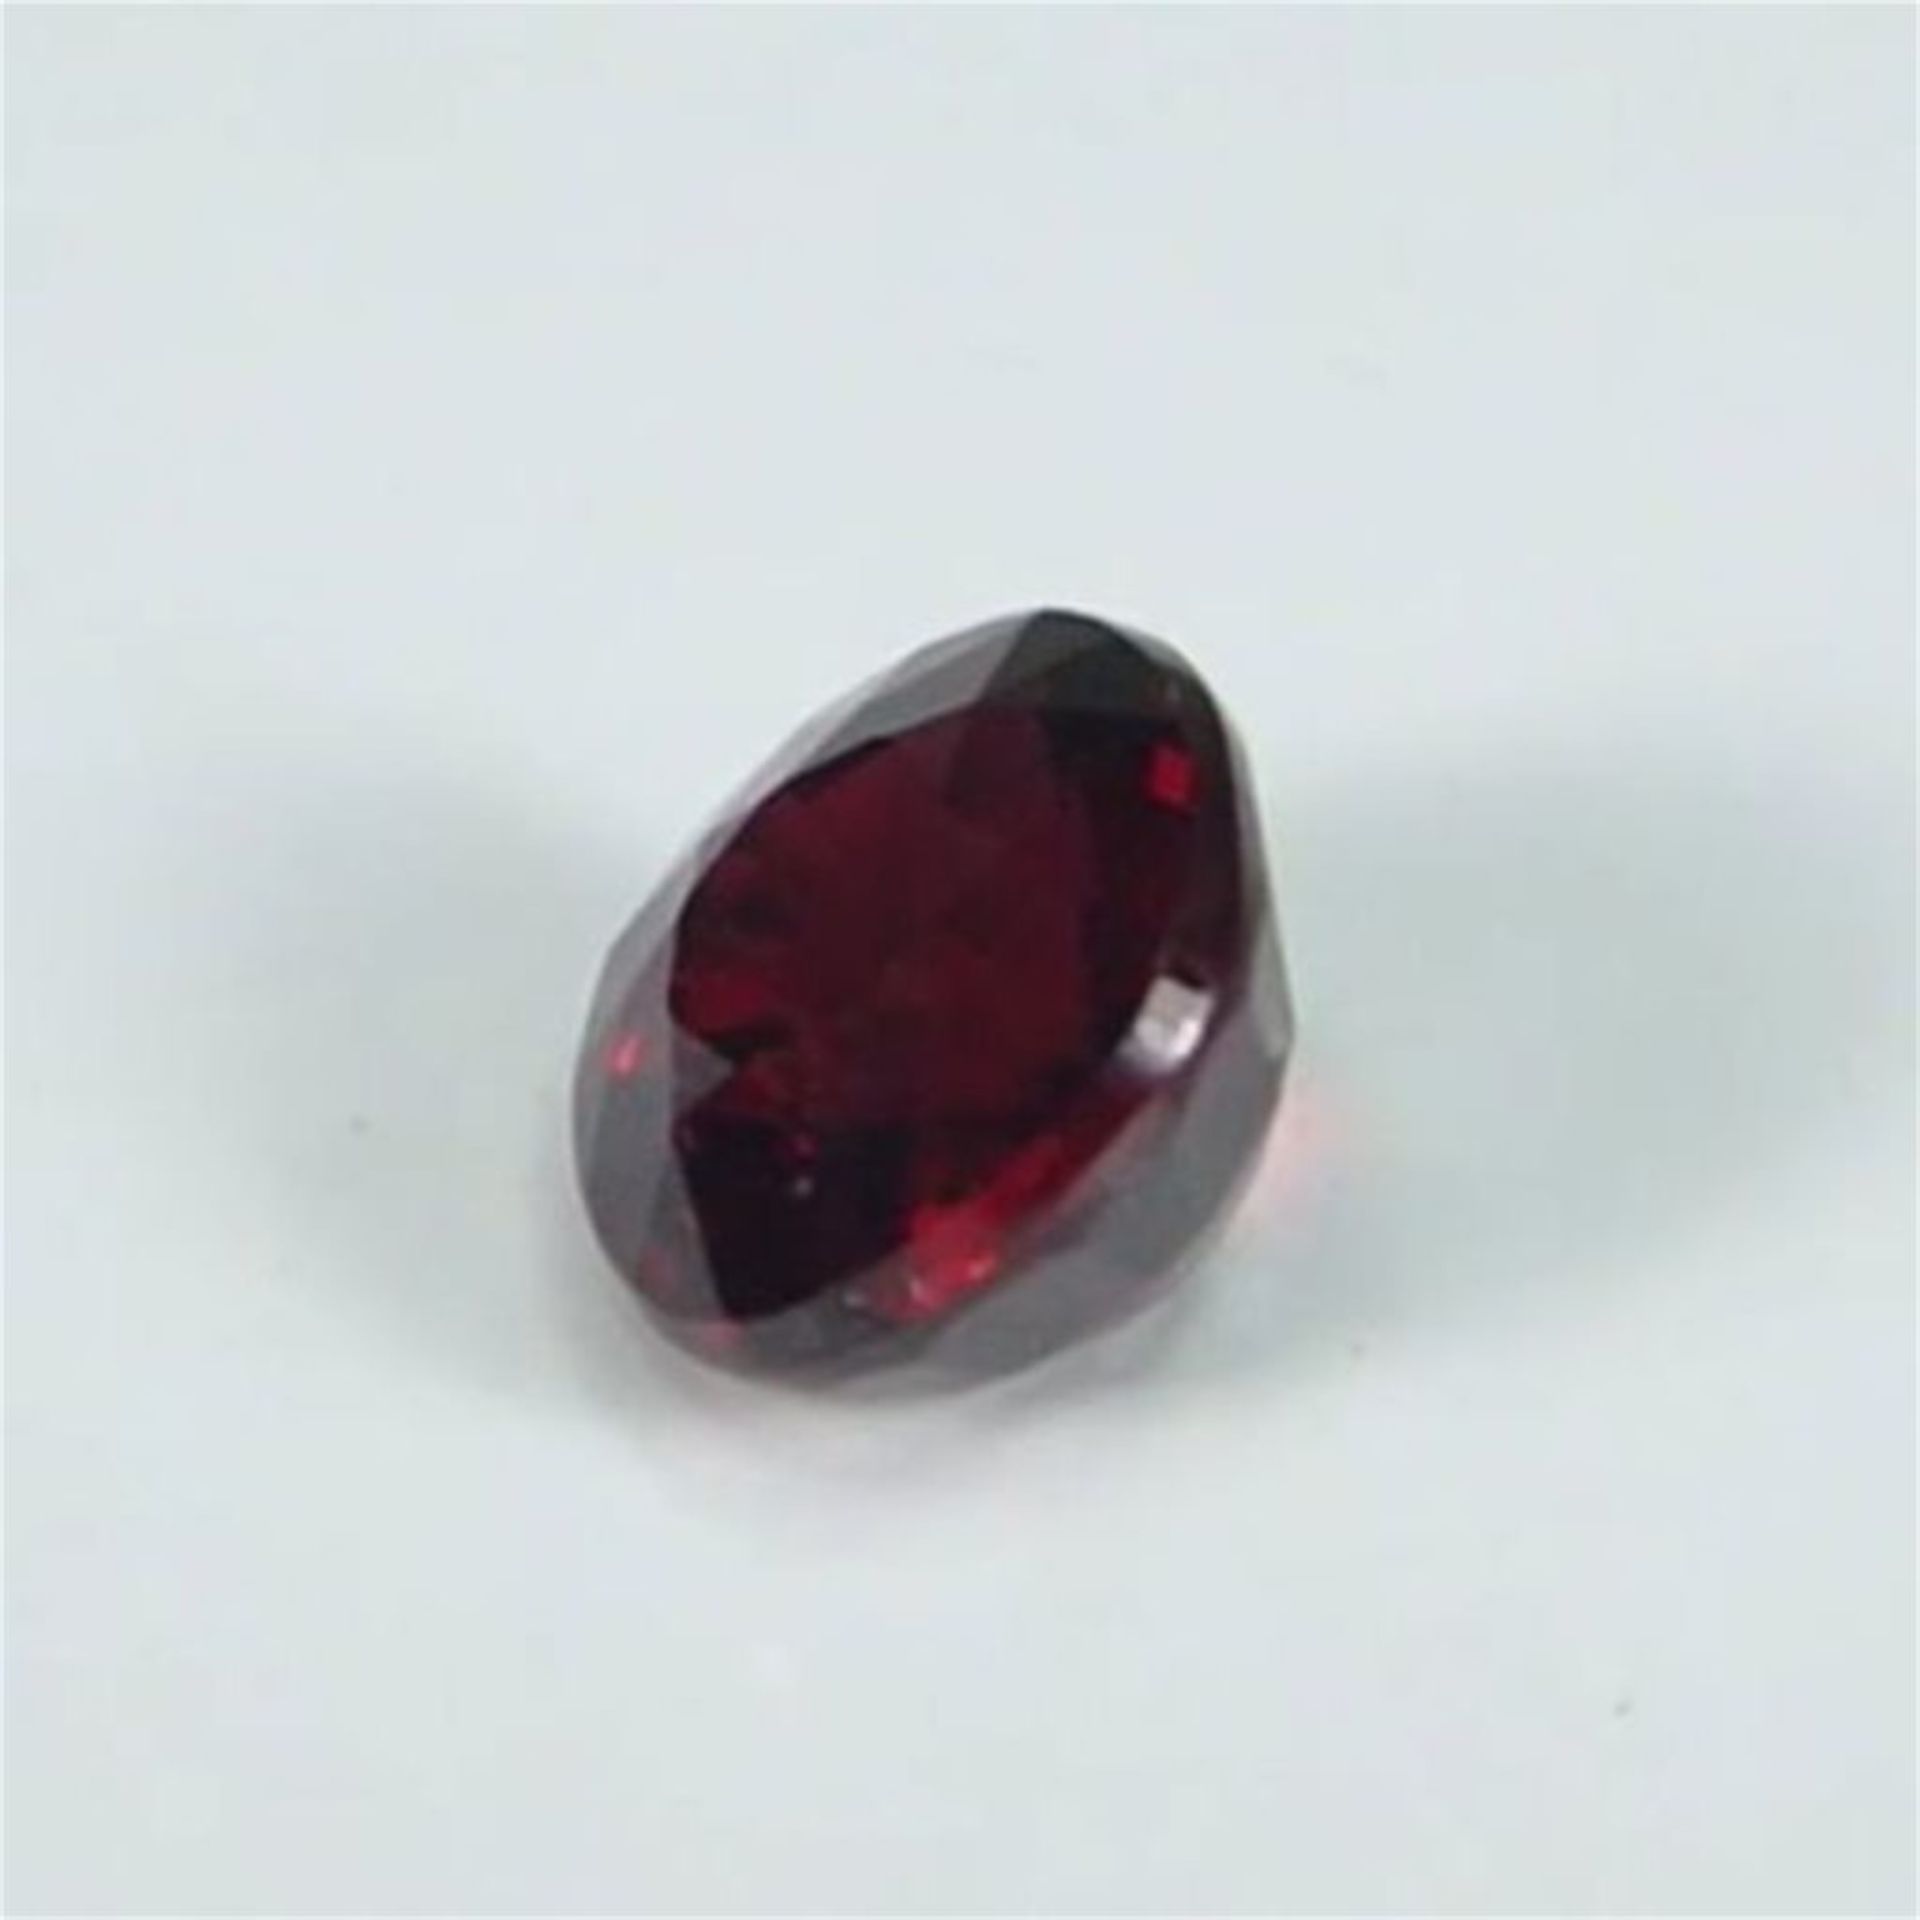 GIA Certified 1.09 ct. Untreated Pigeon’s Blood Ruby - BURMA - Image 9 of 10